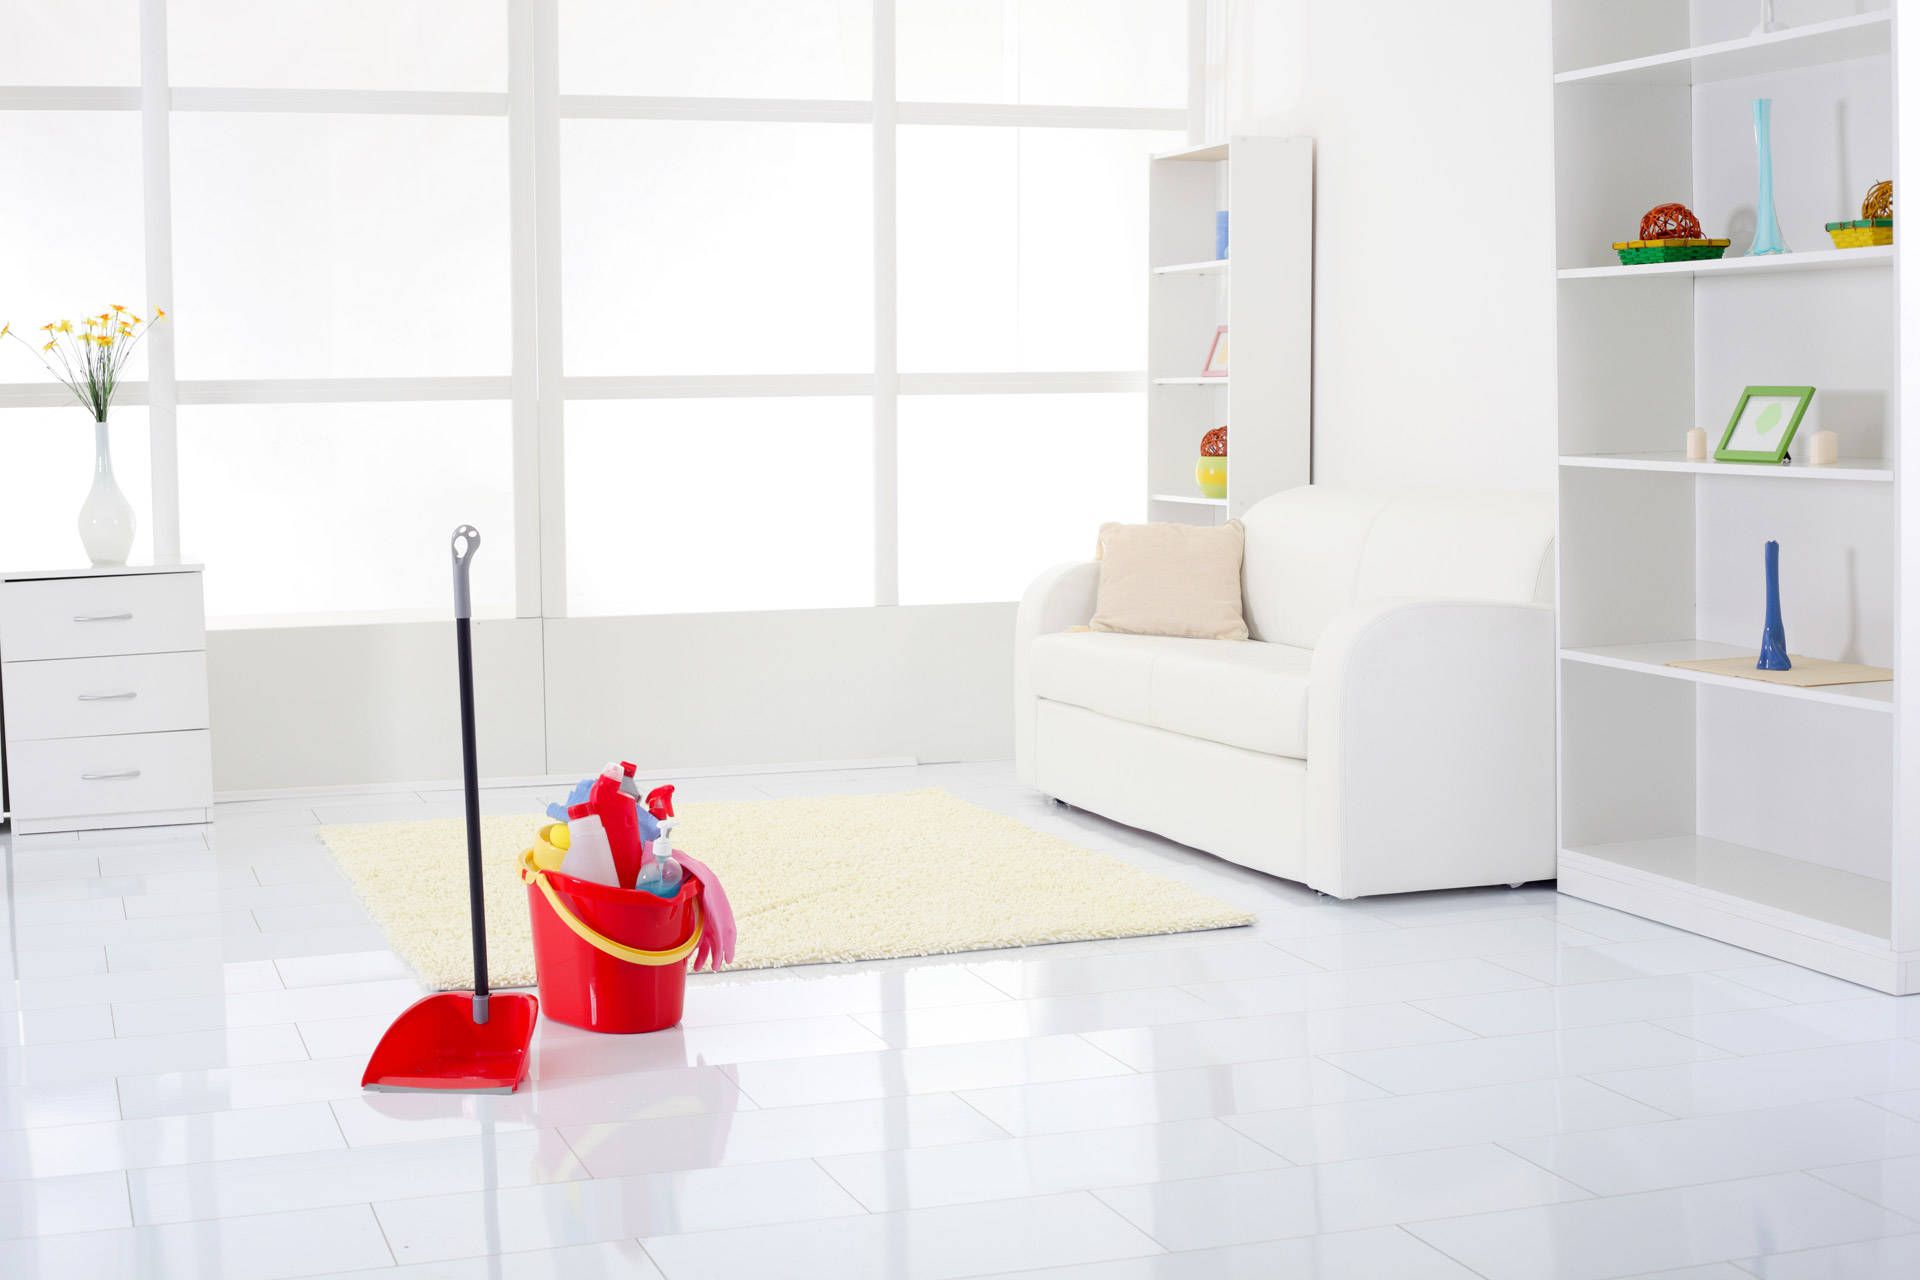 How to Never Clean Your House - Good Cleaning Habits